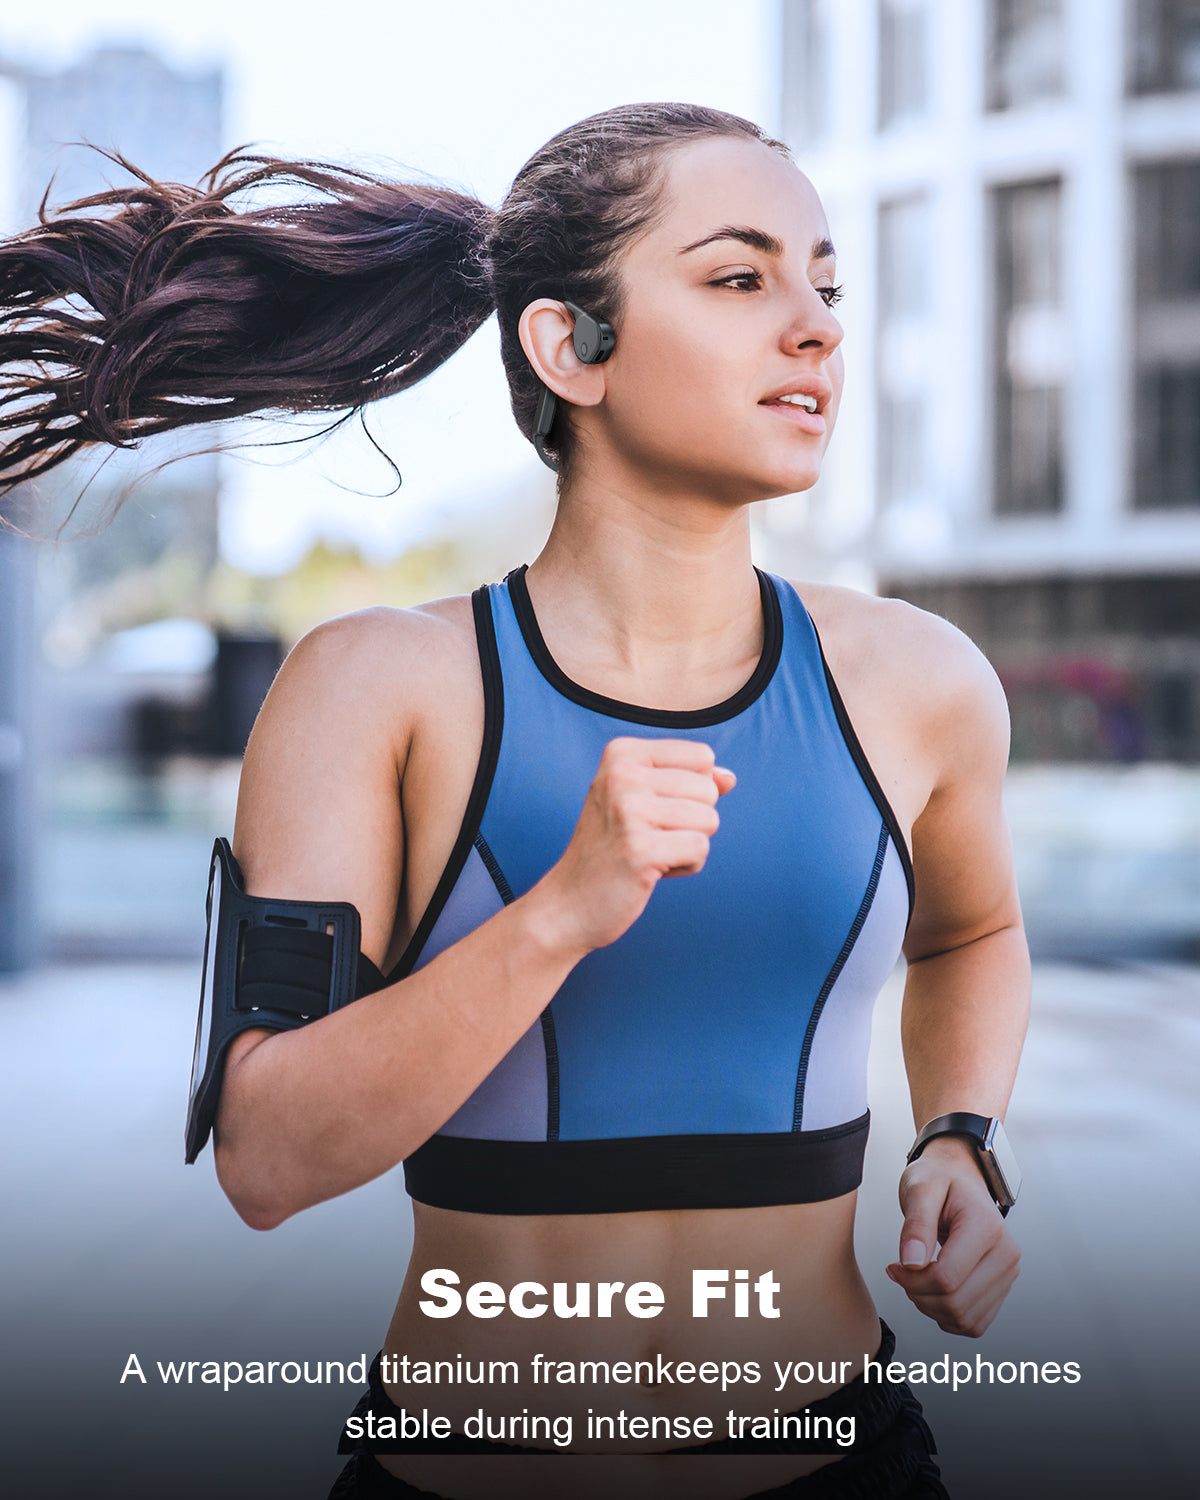 Secure Fit,stable during intense training